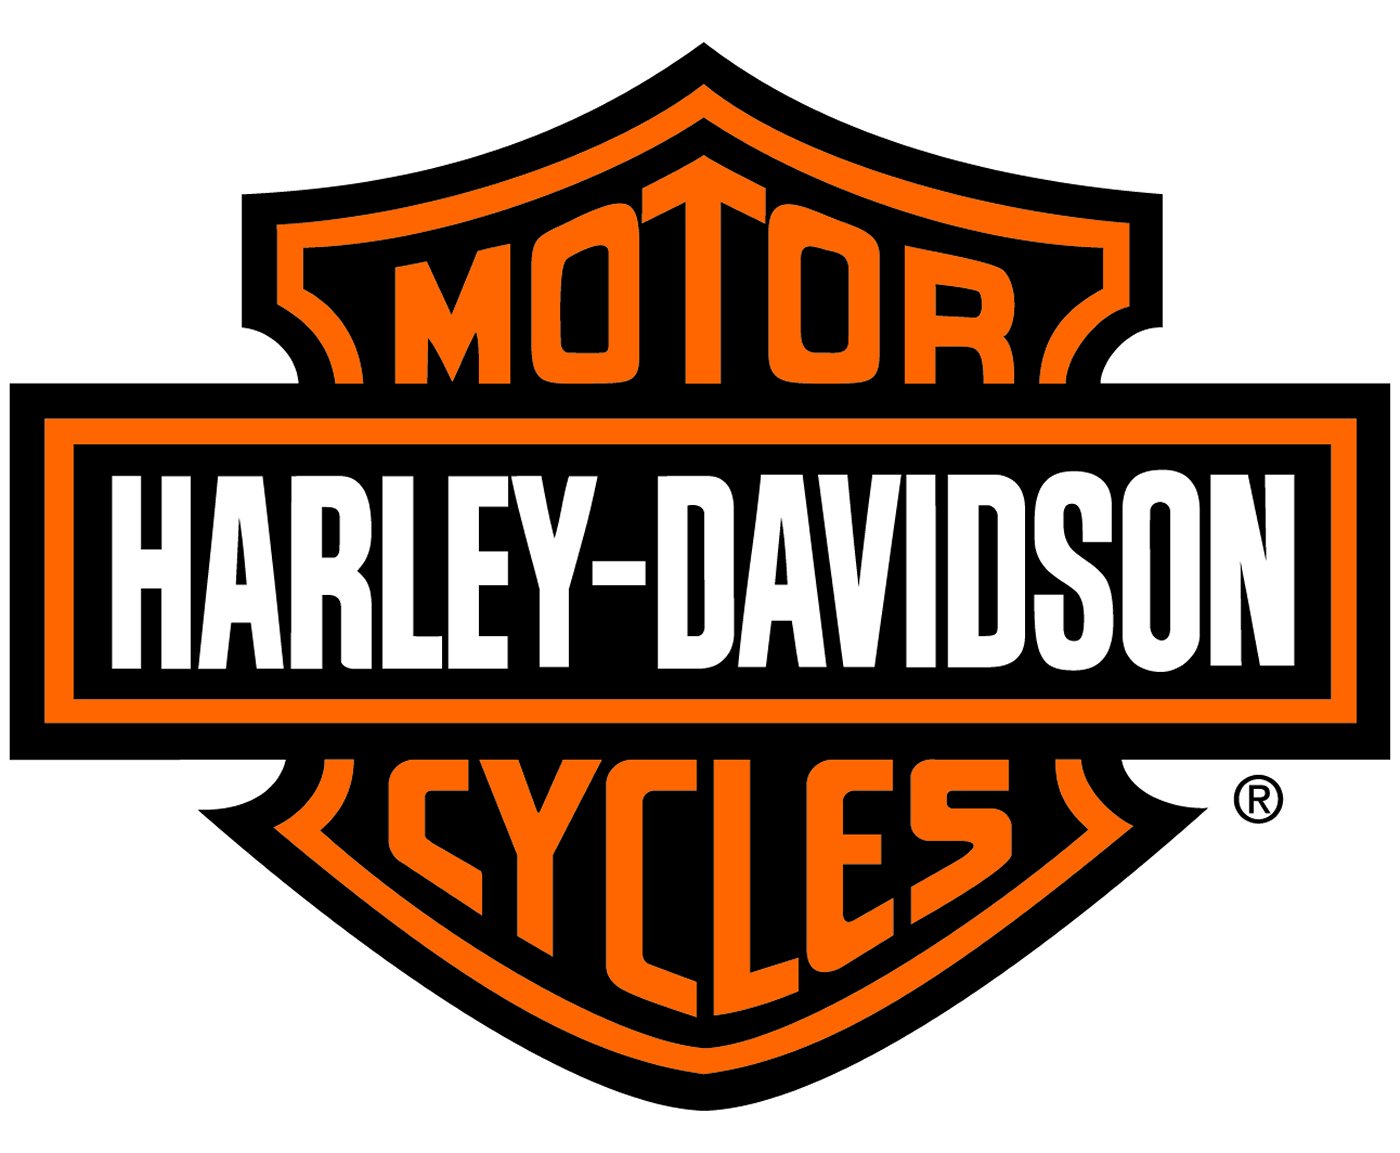 Special Financing and Deals For Military With Harley Davidson Motorcycles